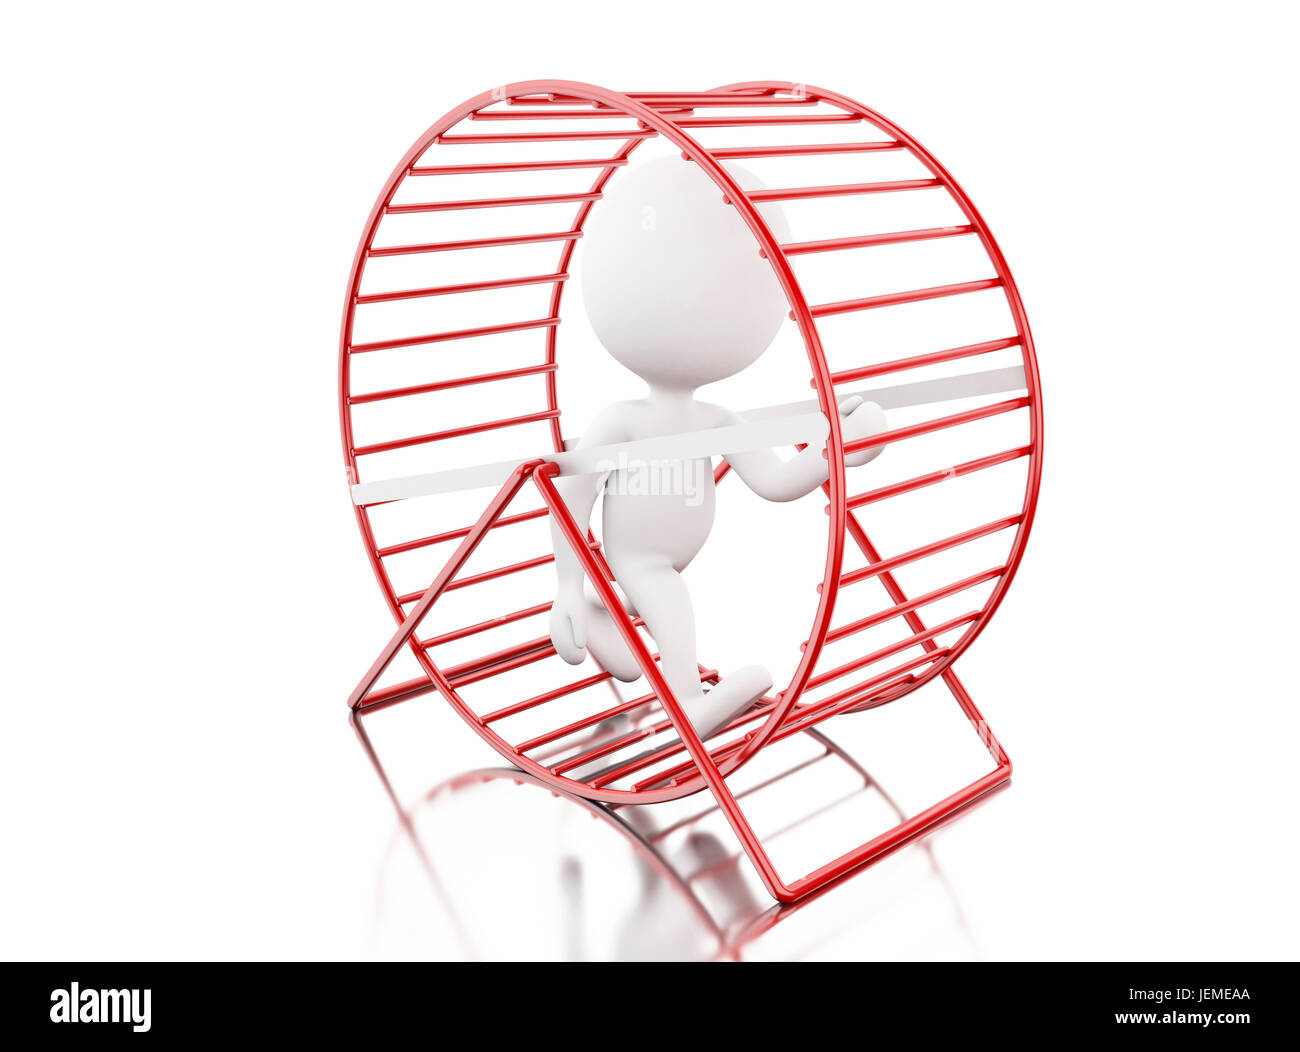 3d illustration. White people running in a hamster wheel. Isolated white background Stock Photo